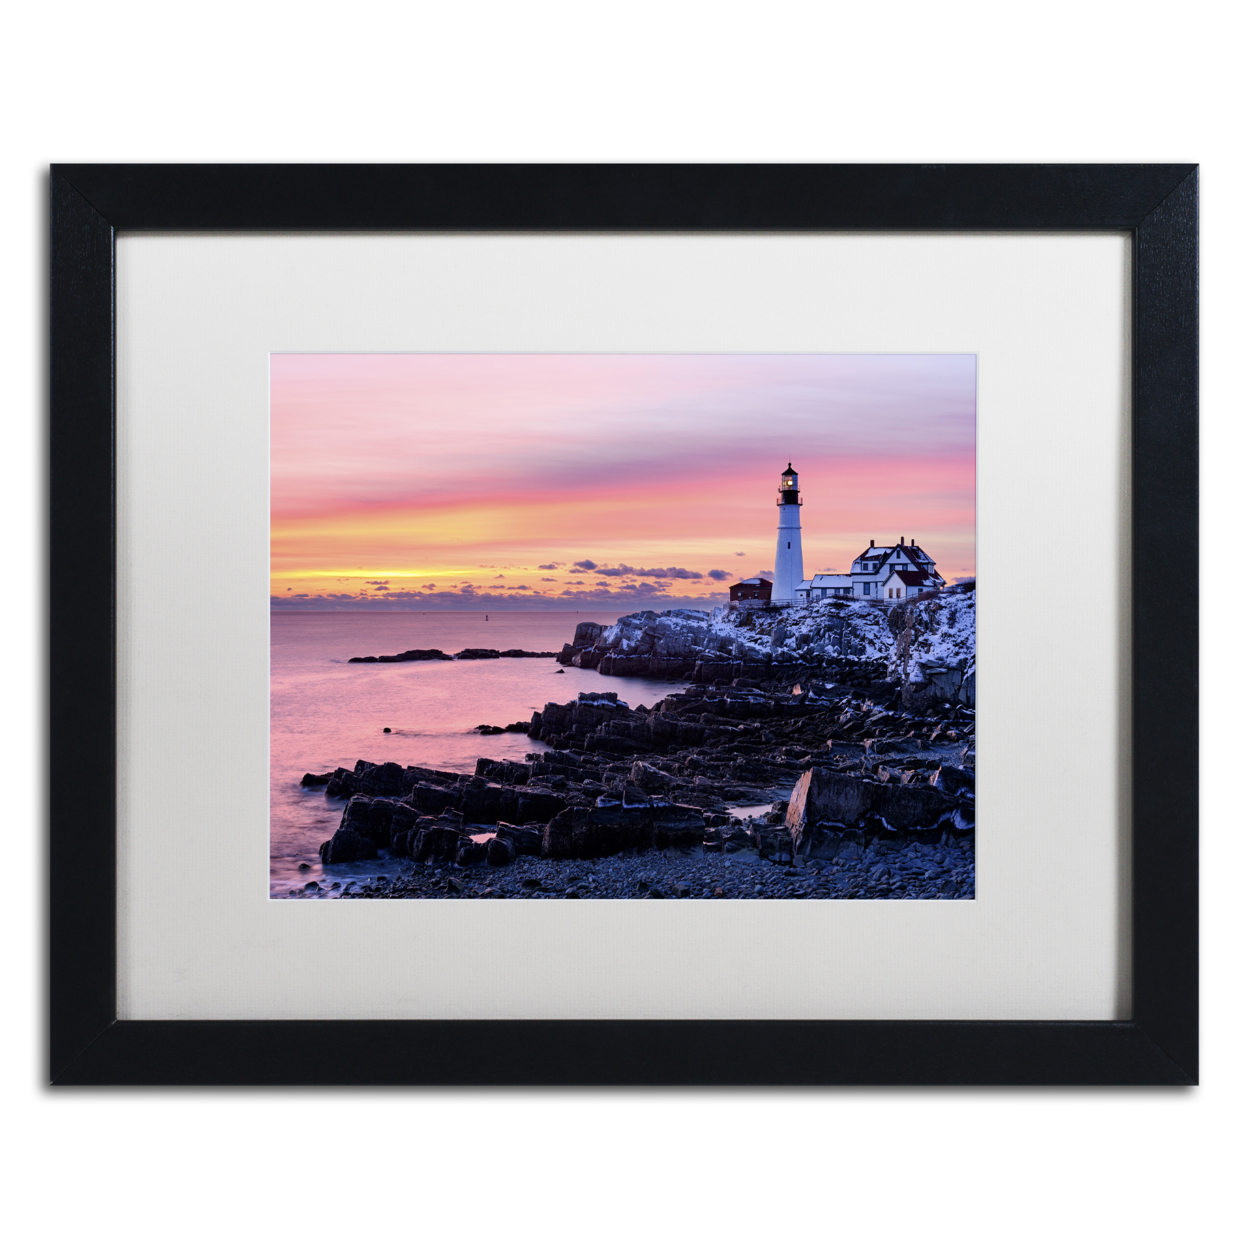 Michael Blanchette Photography 'Light Of Dawn' Black Wooden Framed Art 18 X 22 Inches